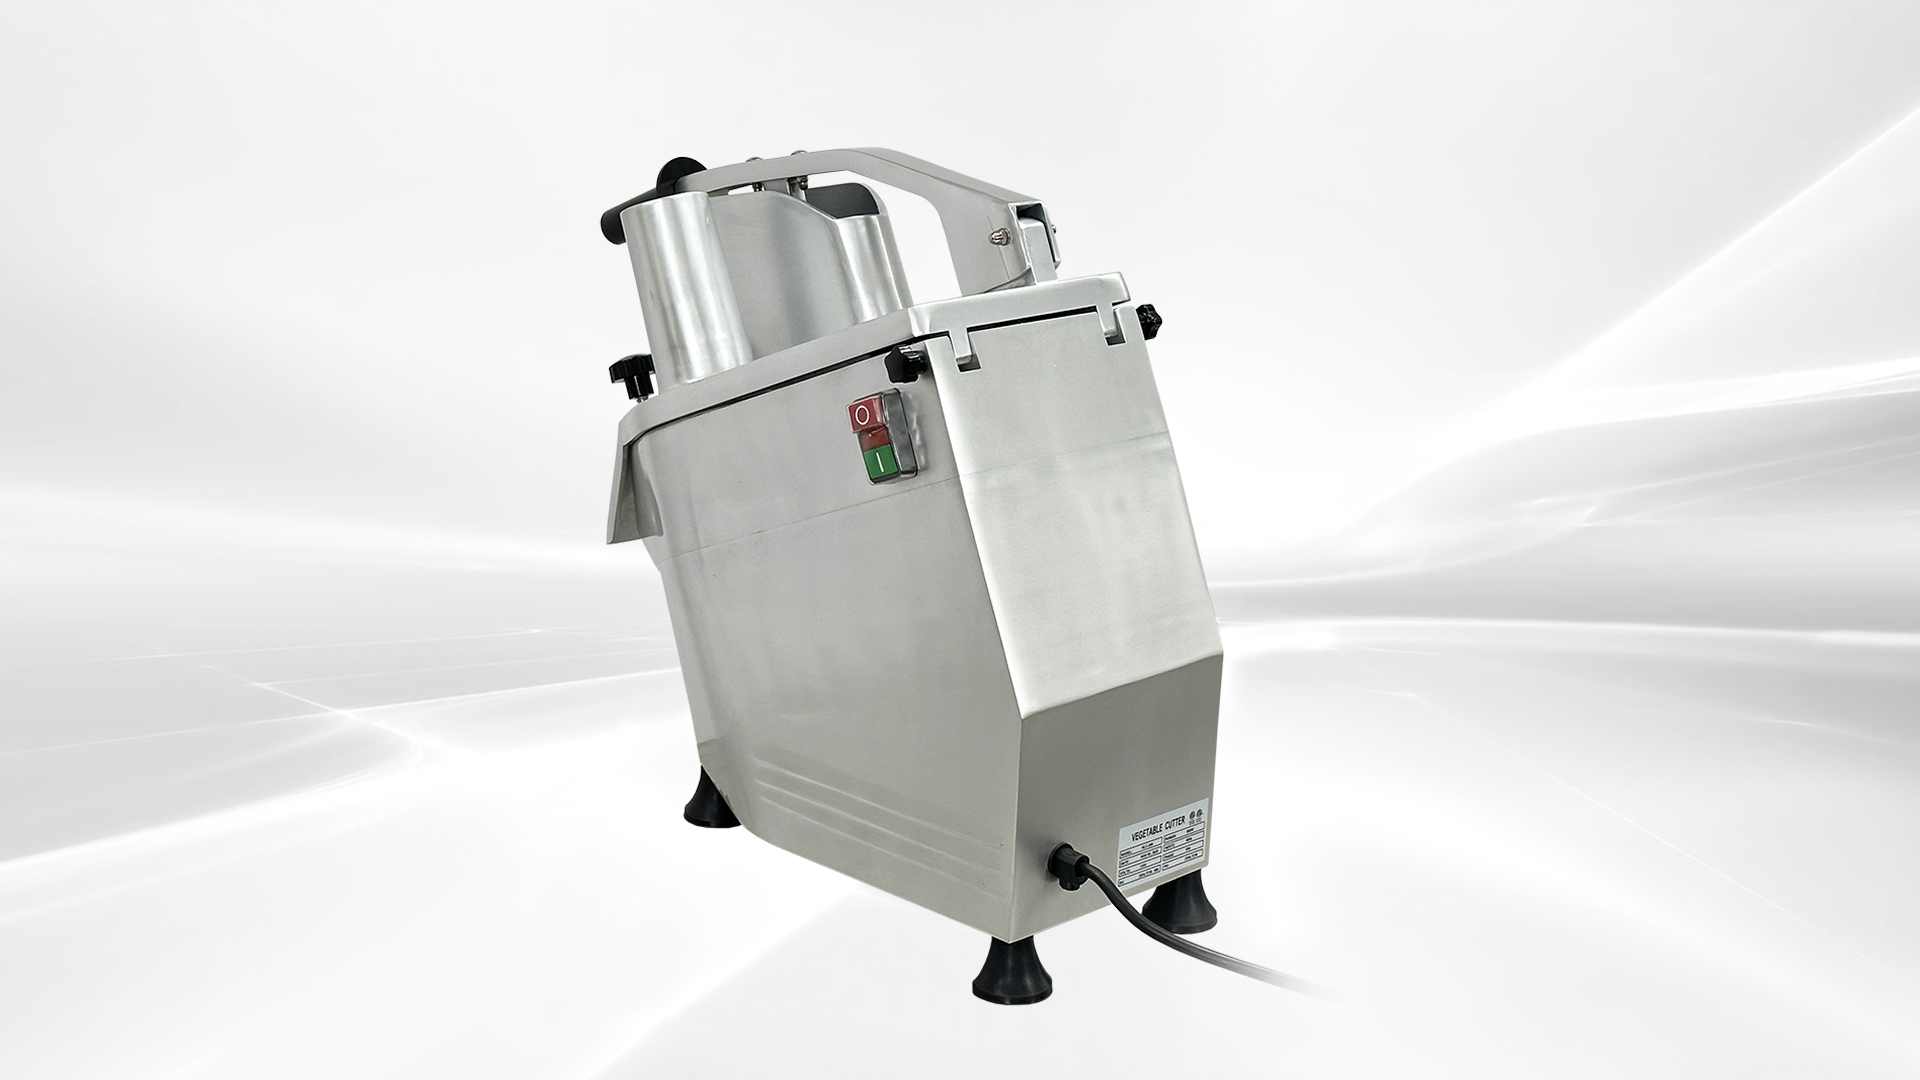 Vegetable Processing Machine Hlc-300 Vegetable Cutter - Buy Vegetable  Processing Machine,Vegetable Cutter Product on